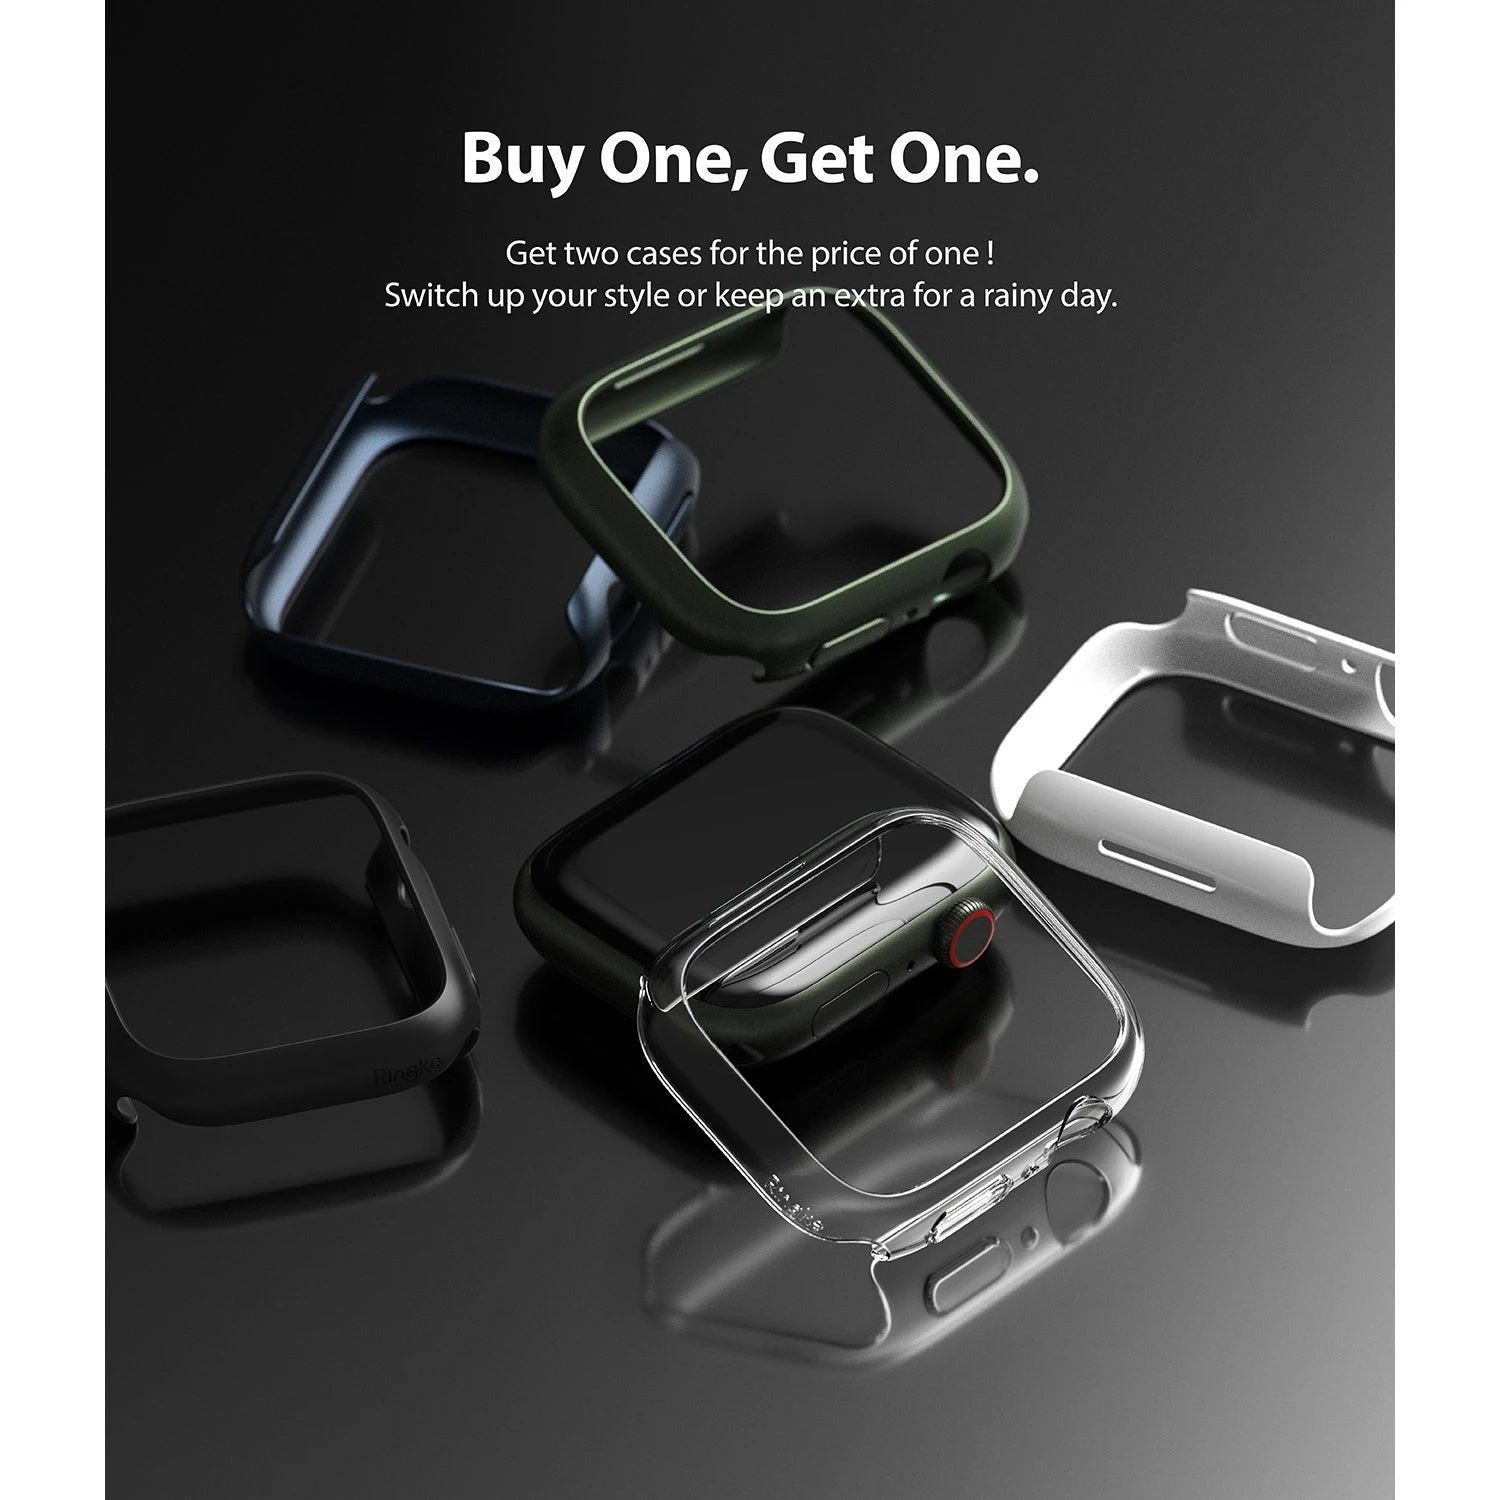 Shop and buy Ringke Slim Case for Apple Watch Series 7 custom-made to fit perfectly anti-discoloration| Casefactorie® online with great deals and sales prices with fast and safe shipping. Casefactorie is the largest Singapore official authorised retailer for the largest collection of mobile premium accessories.